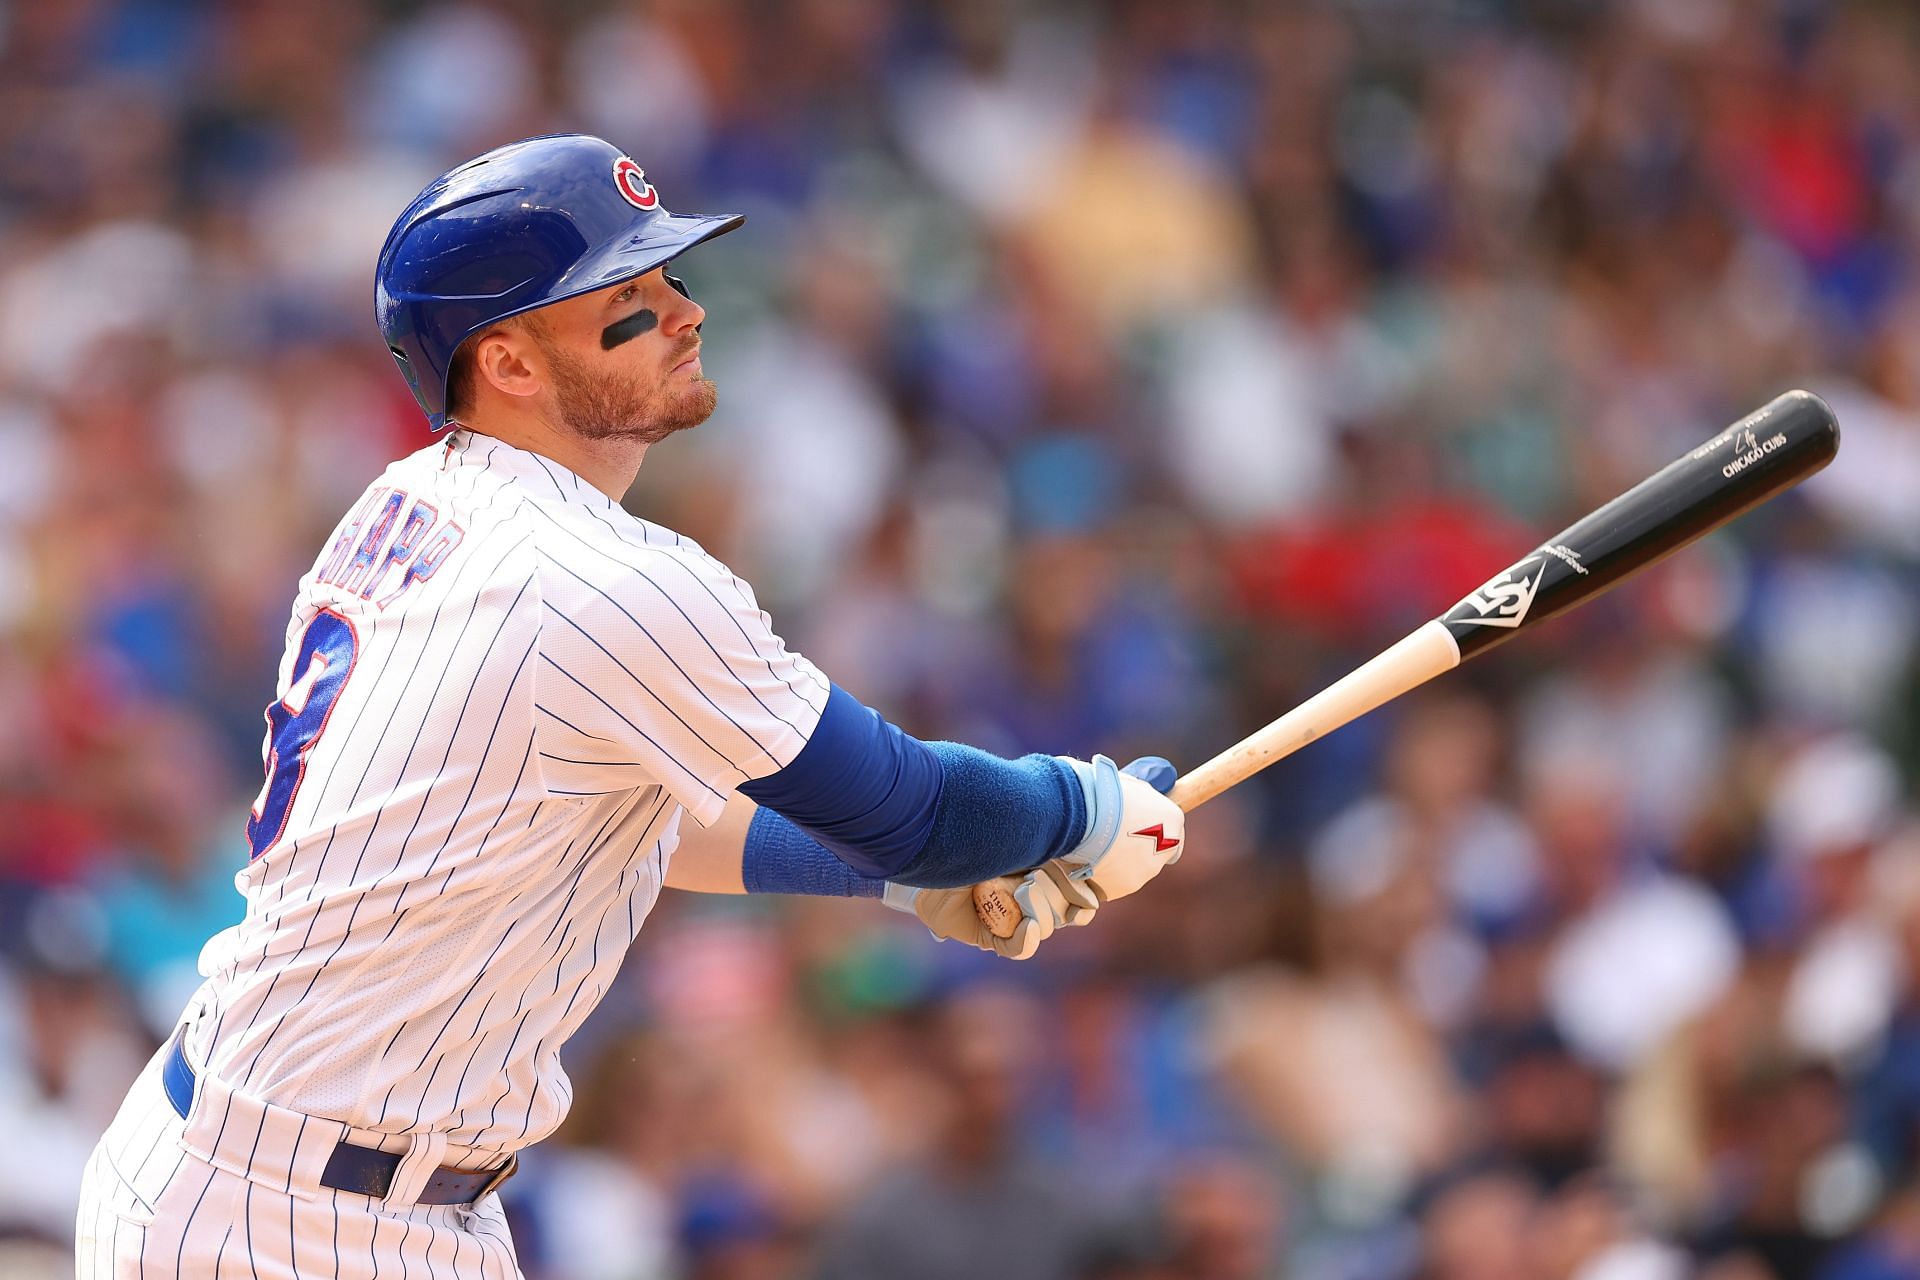 Matt Duffy is finding success with the Chicago Cubs